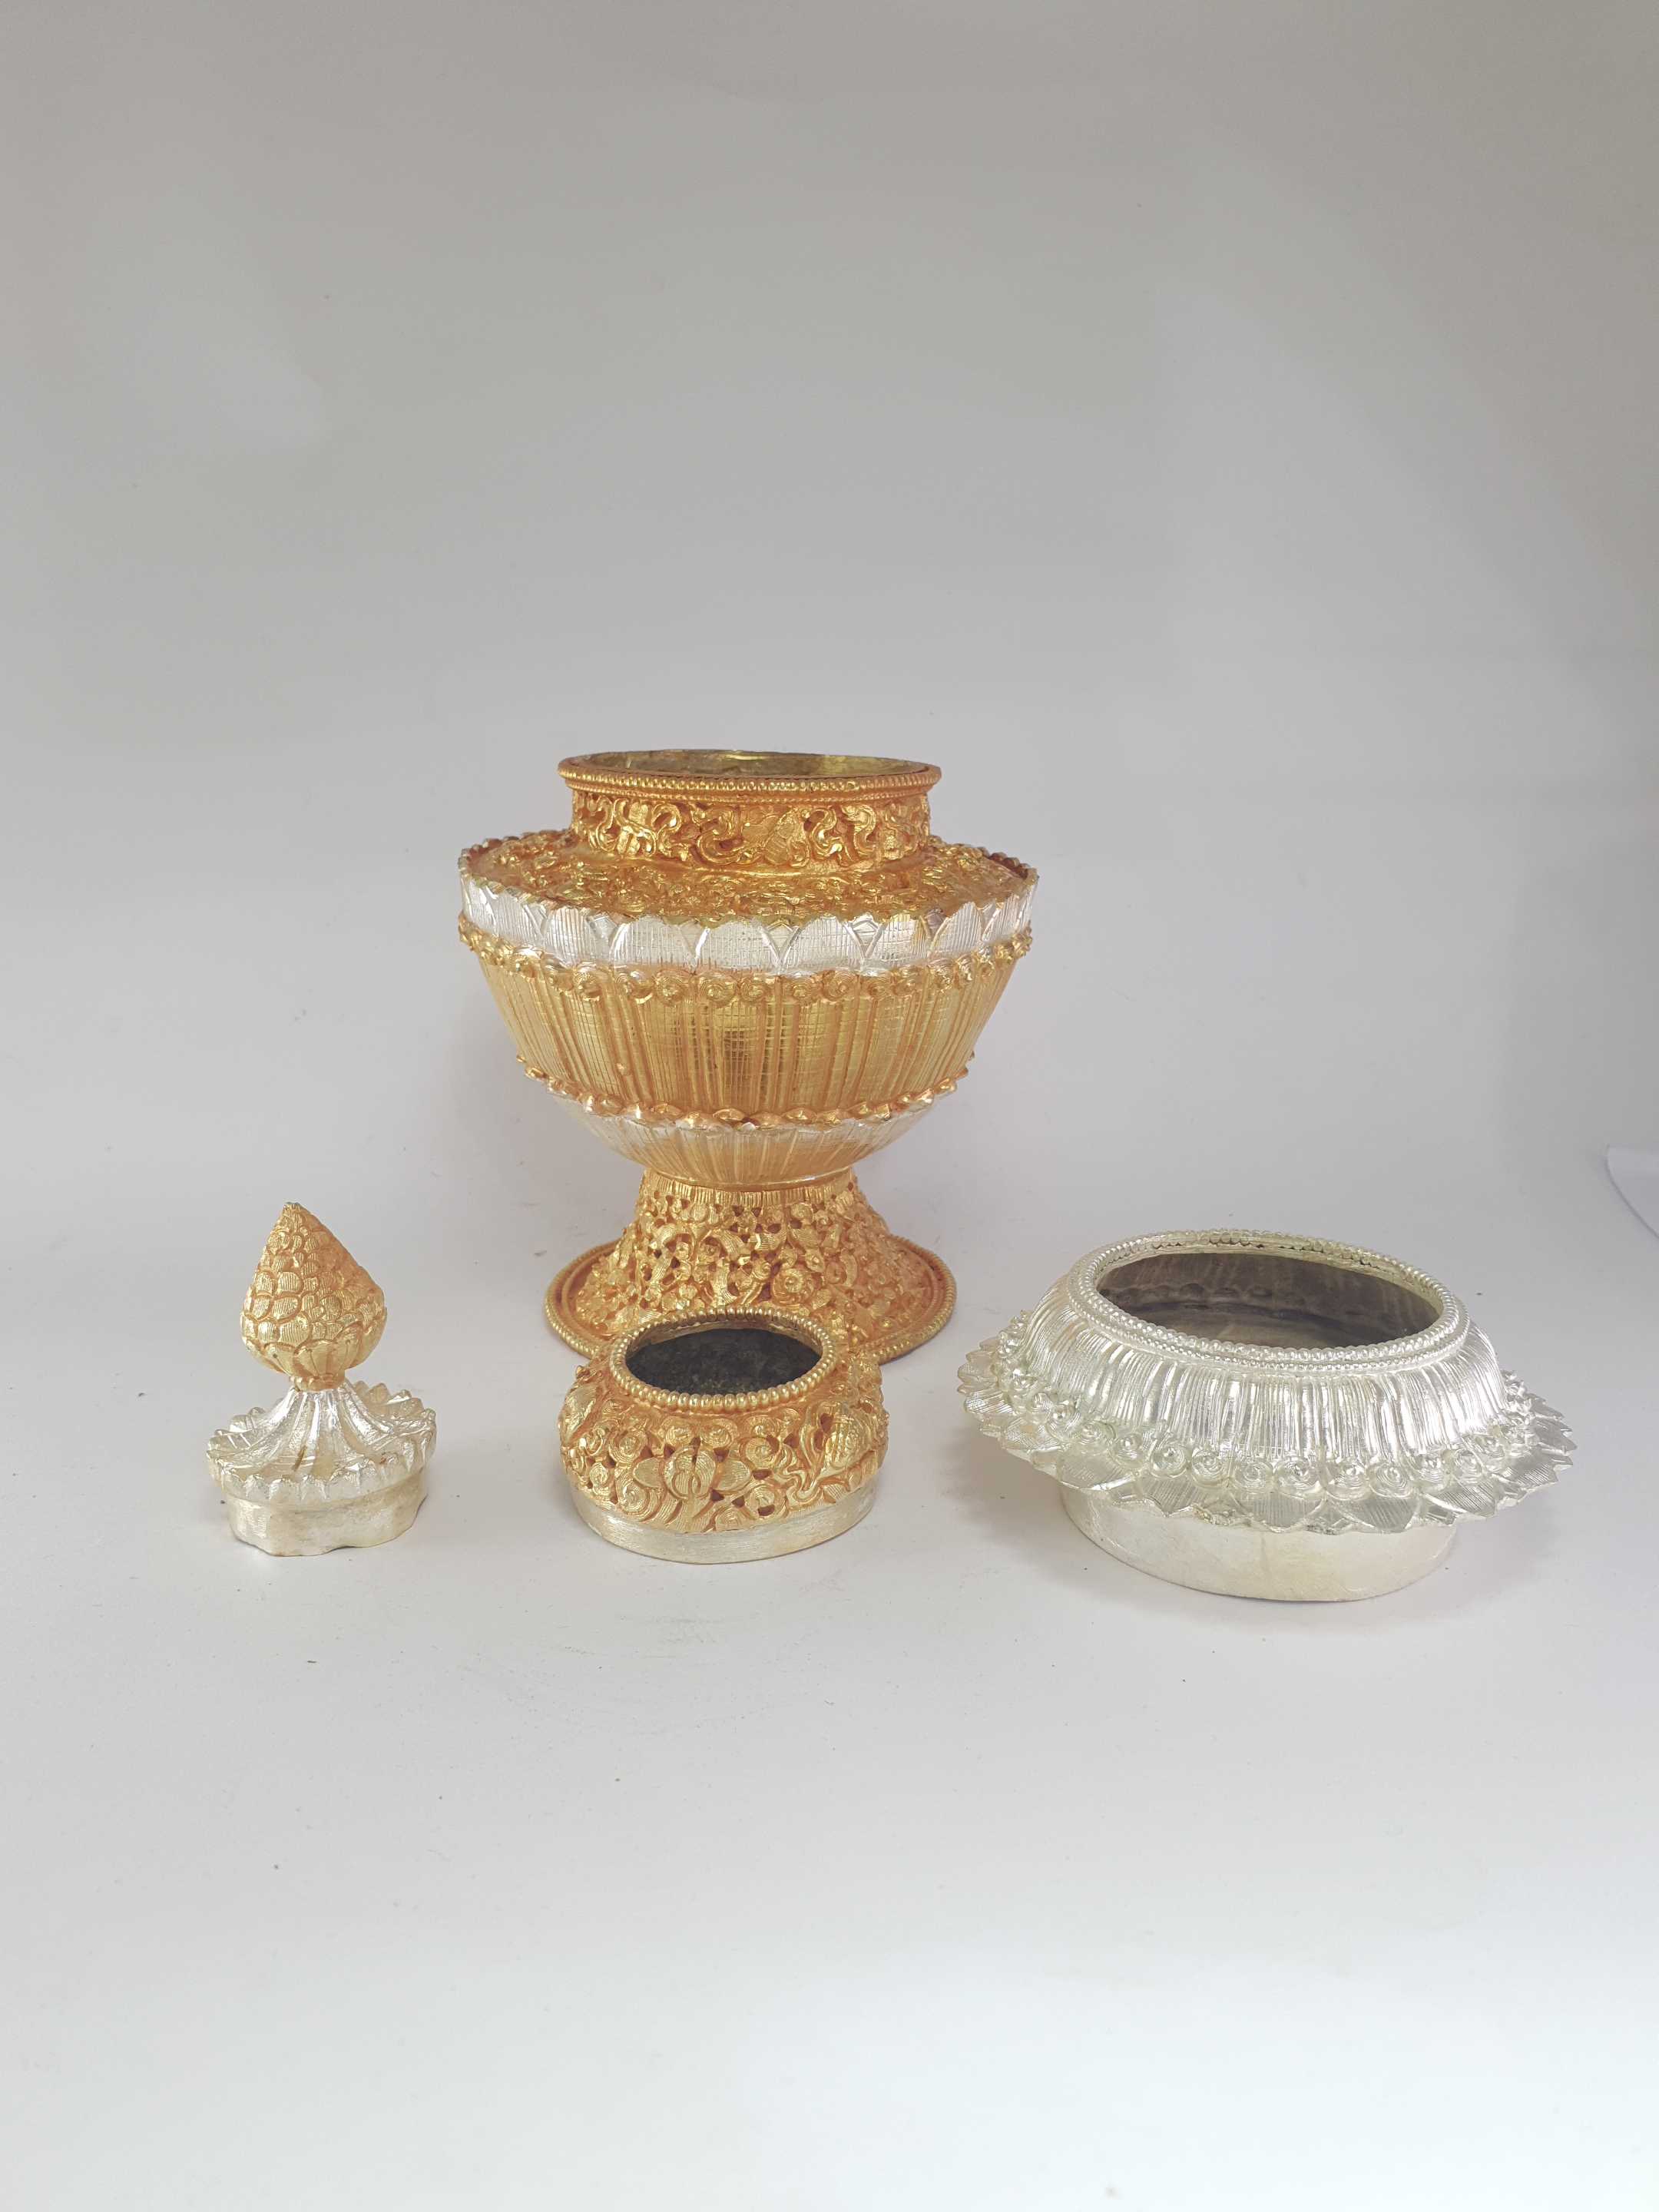 hq, Dophor, Nesi, Vessel For Offering Rice With Deep Carving, gold And Silver Plated, Rice Offering